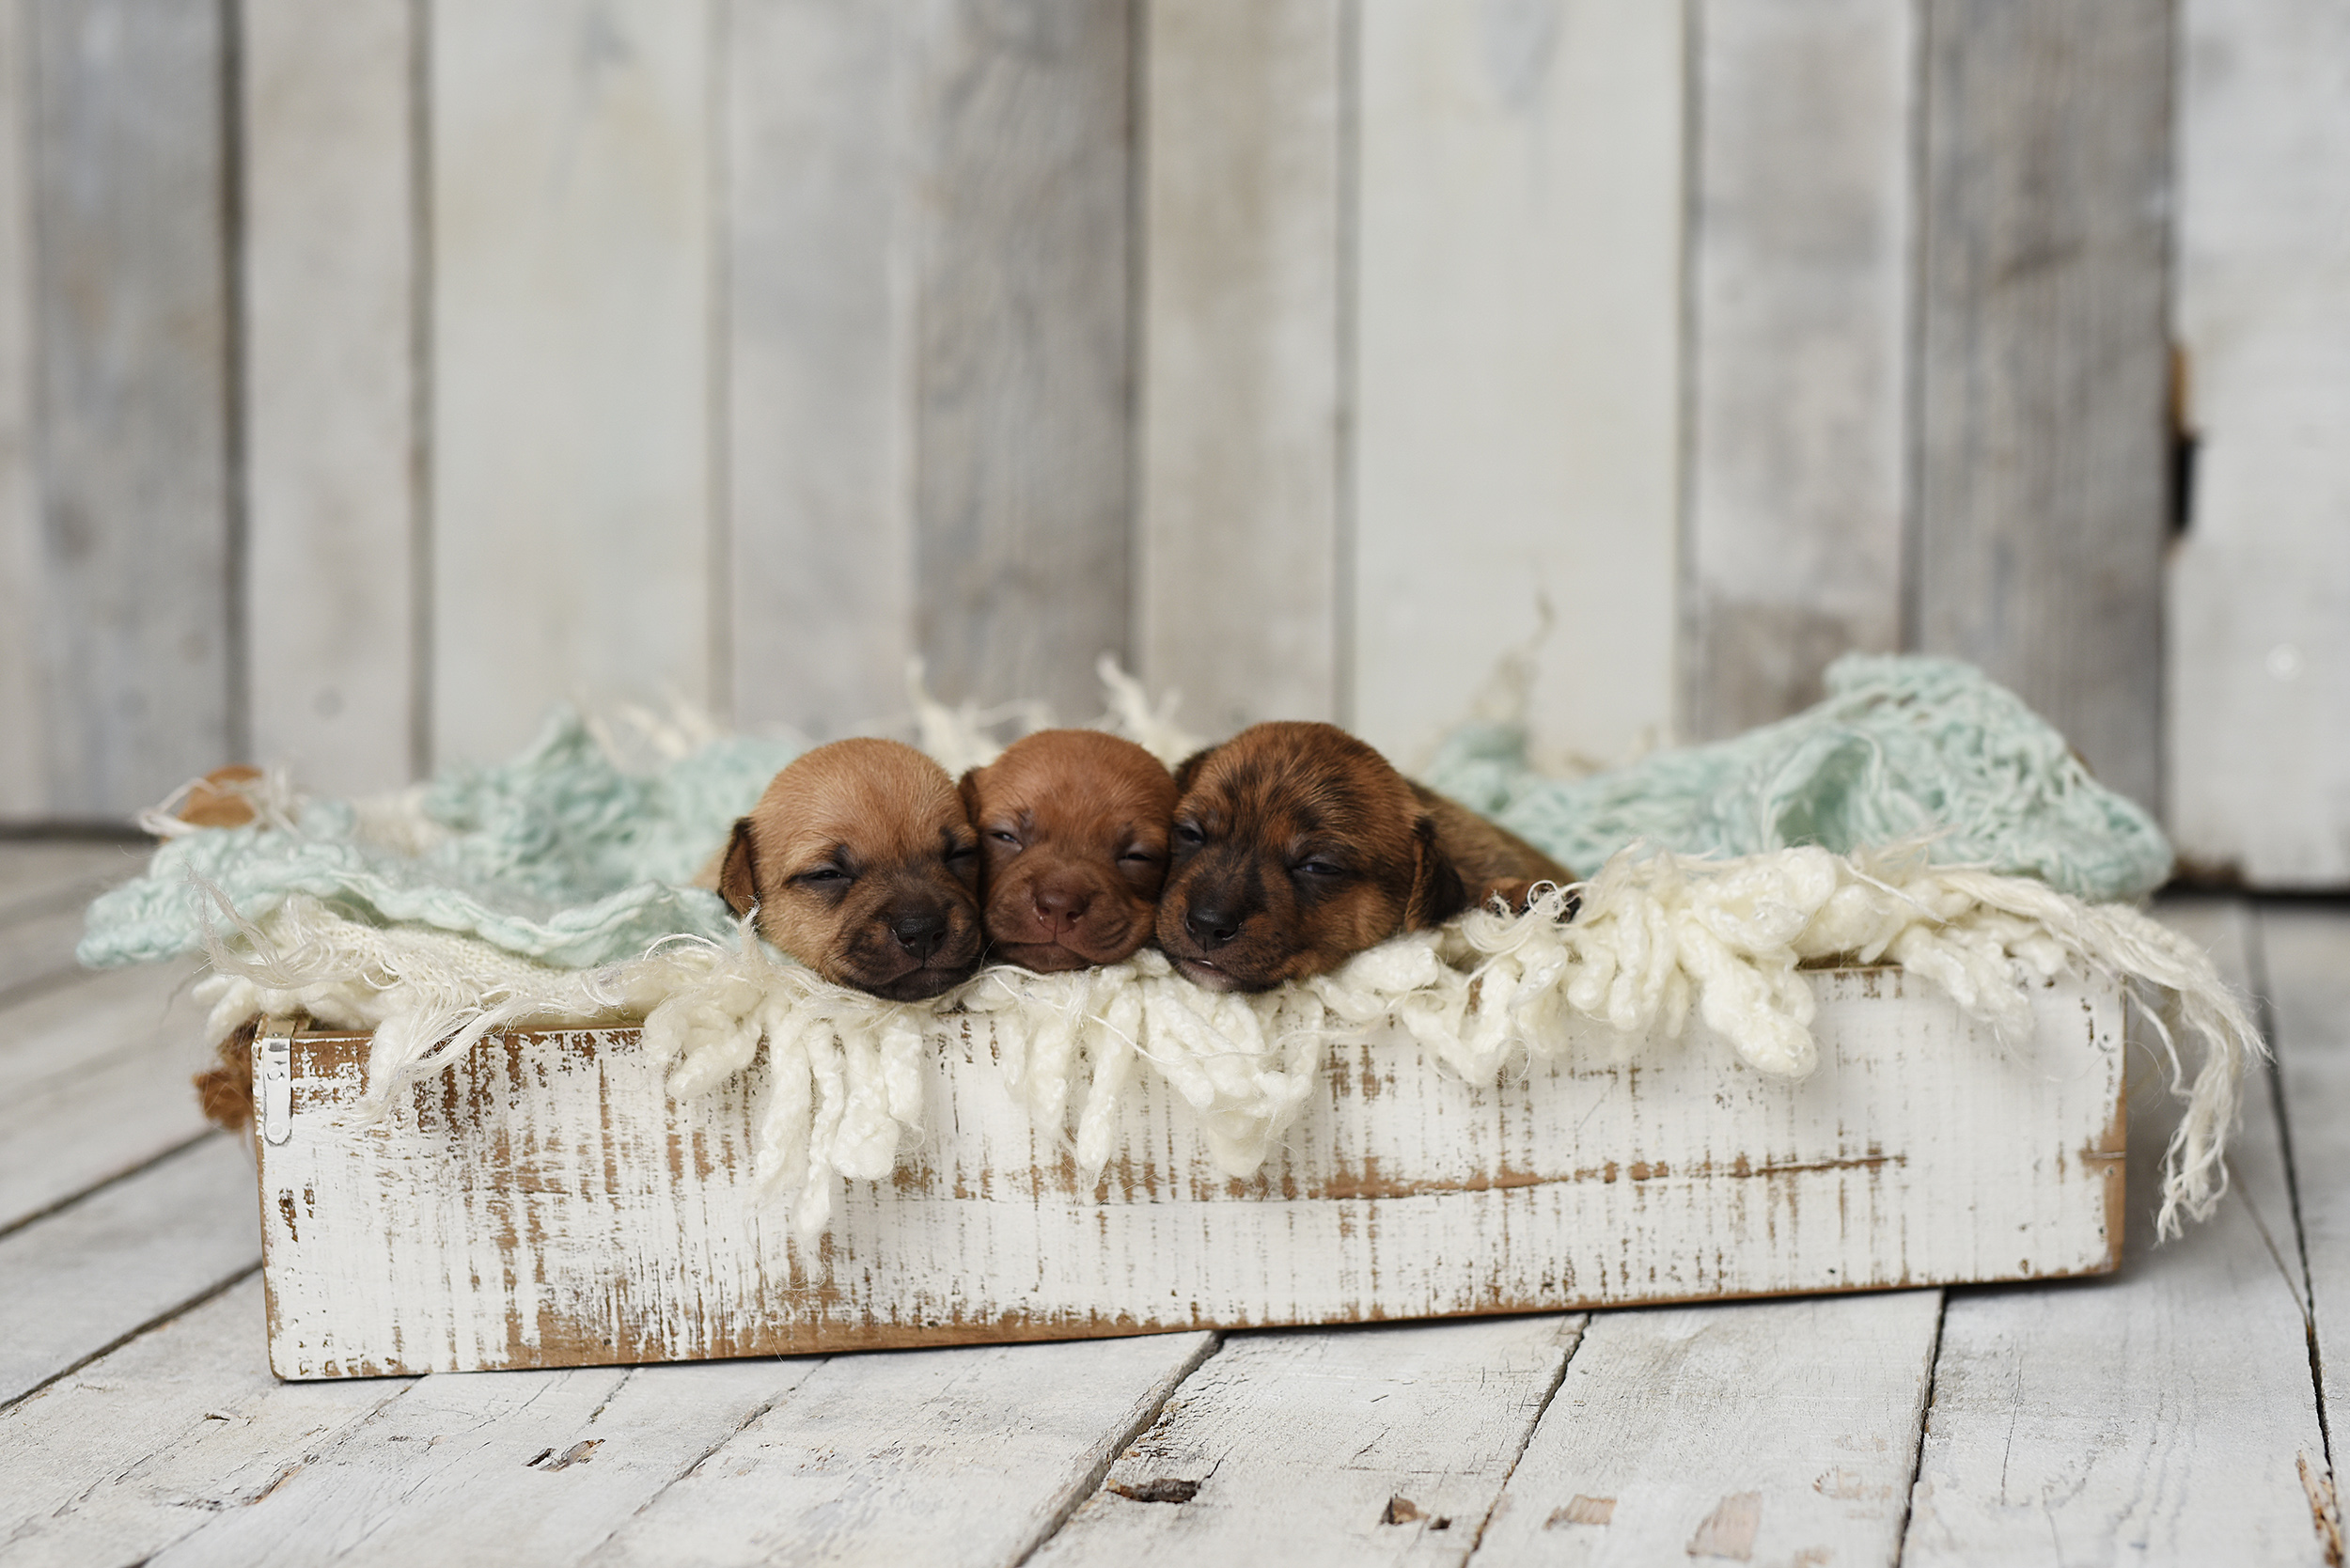 PHOTO: Photographer Kelly Frankenburg said she posed a Chihuahua mom and puppies like human newborns to create photos that could help them get adopted.